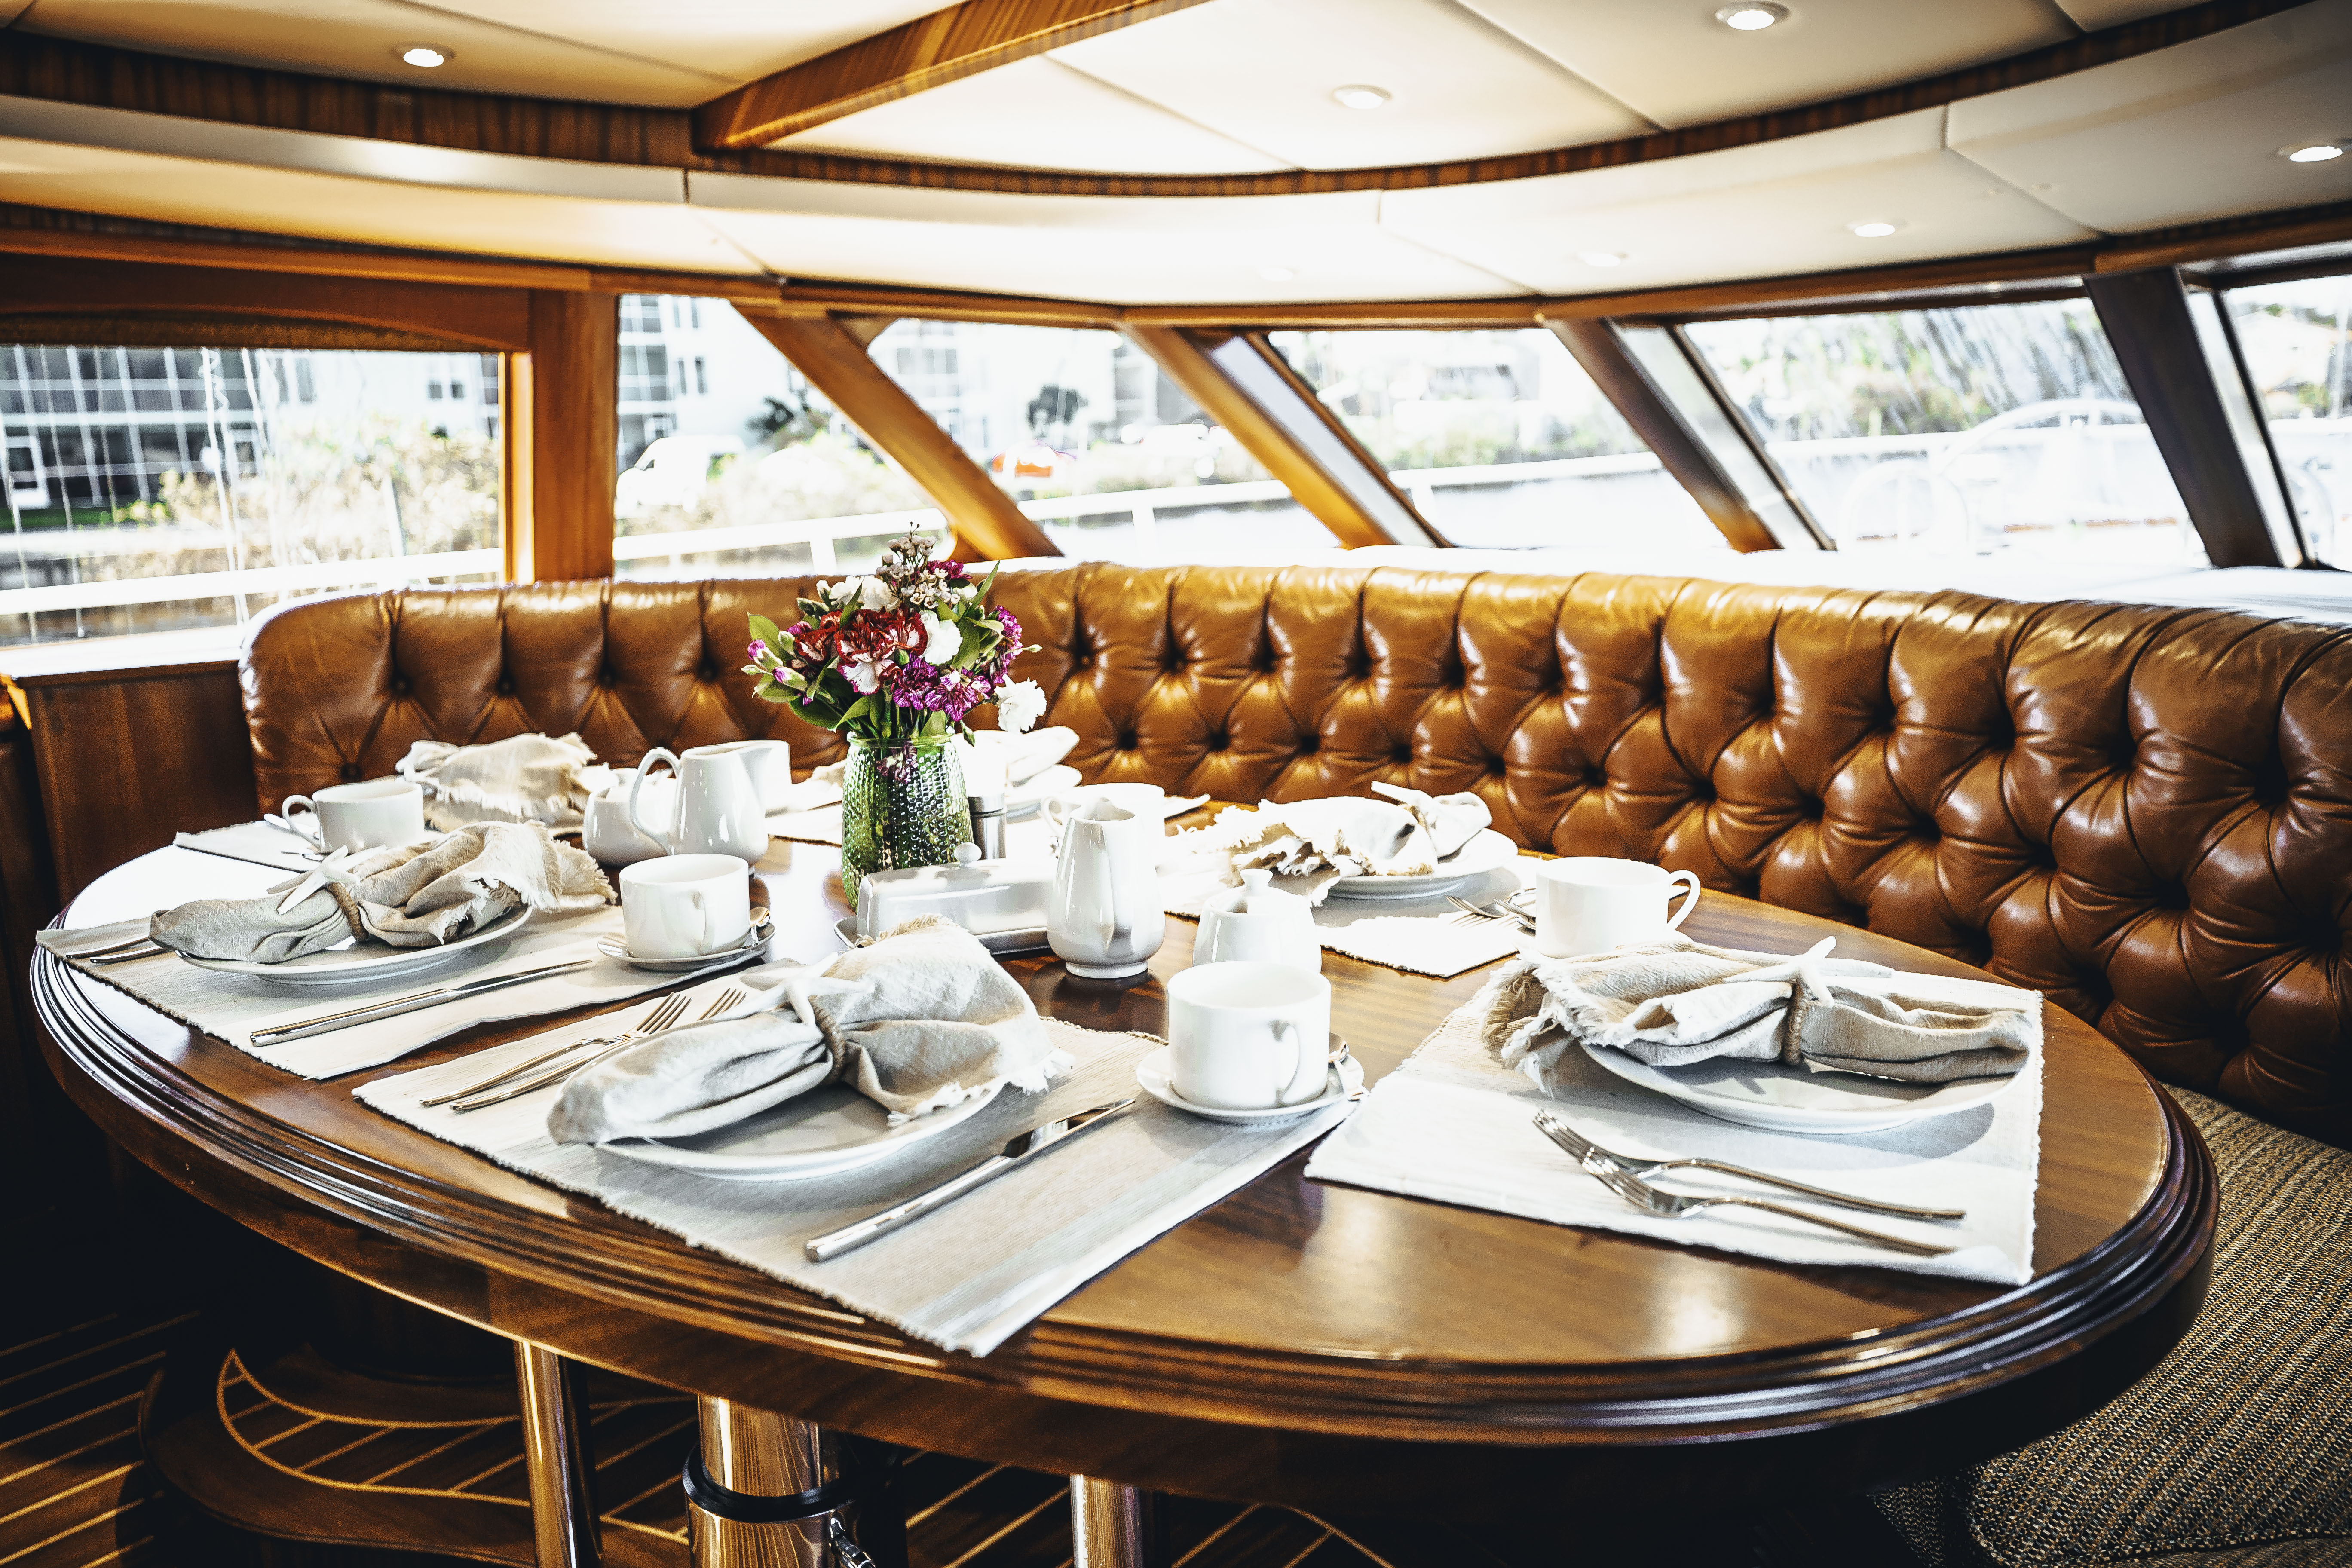 Dine In Galley